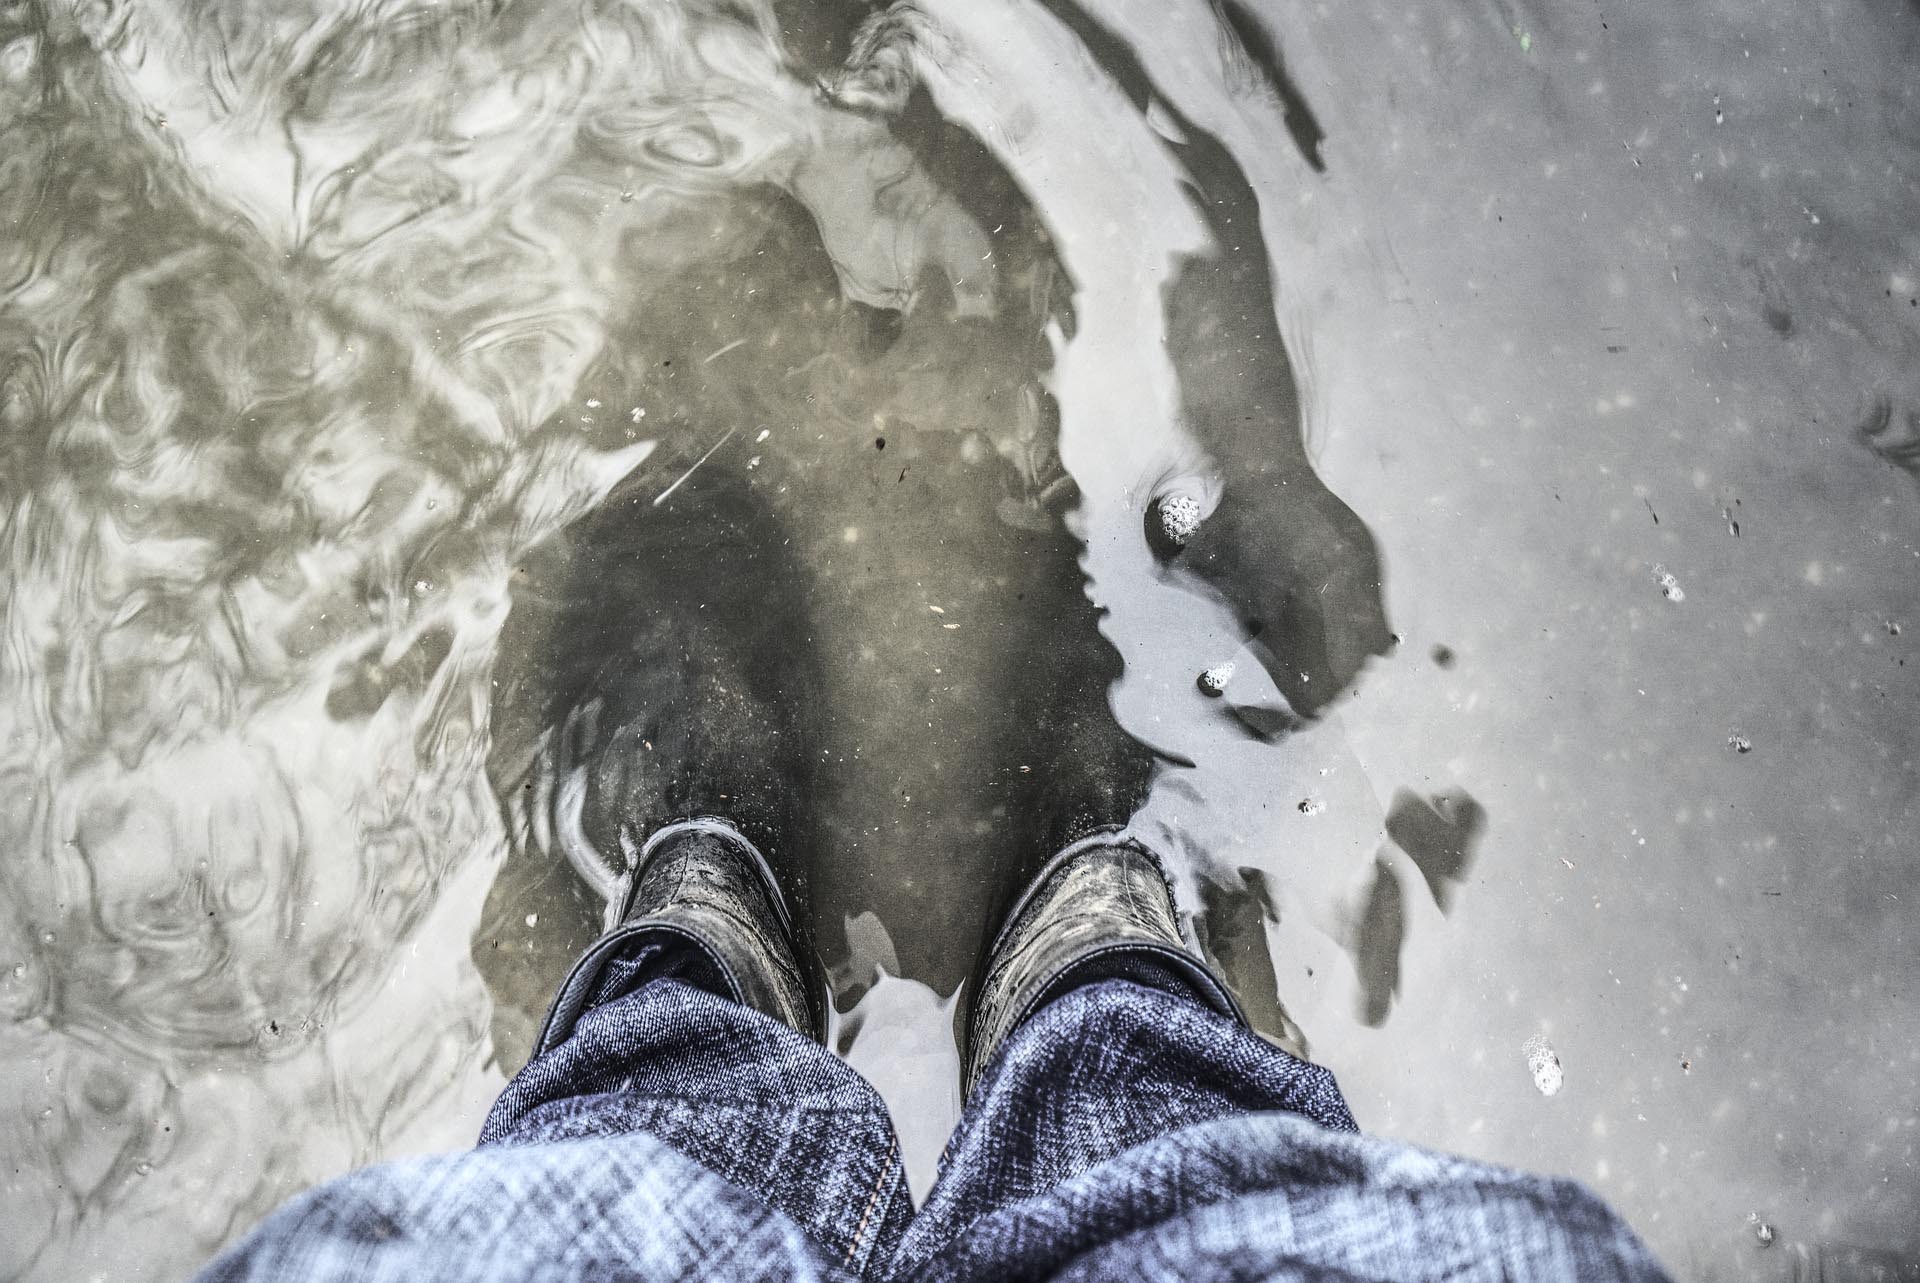 Standing in flooded water